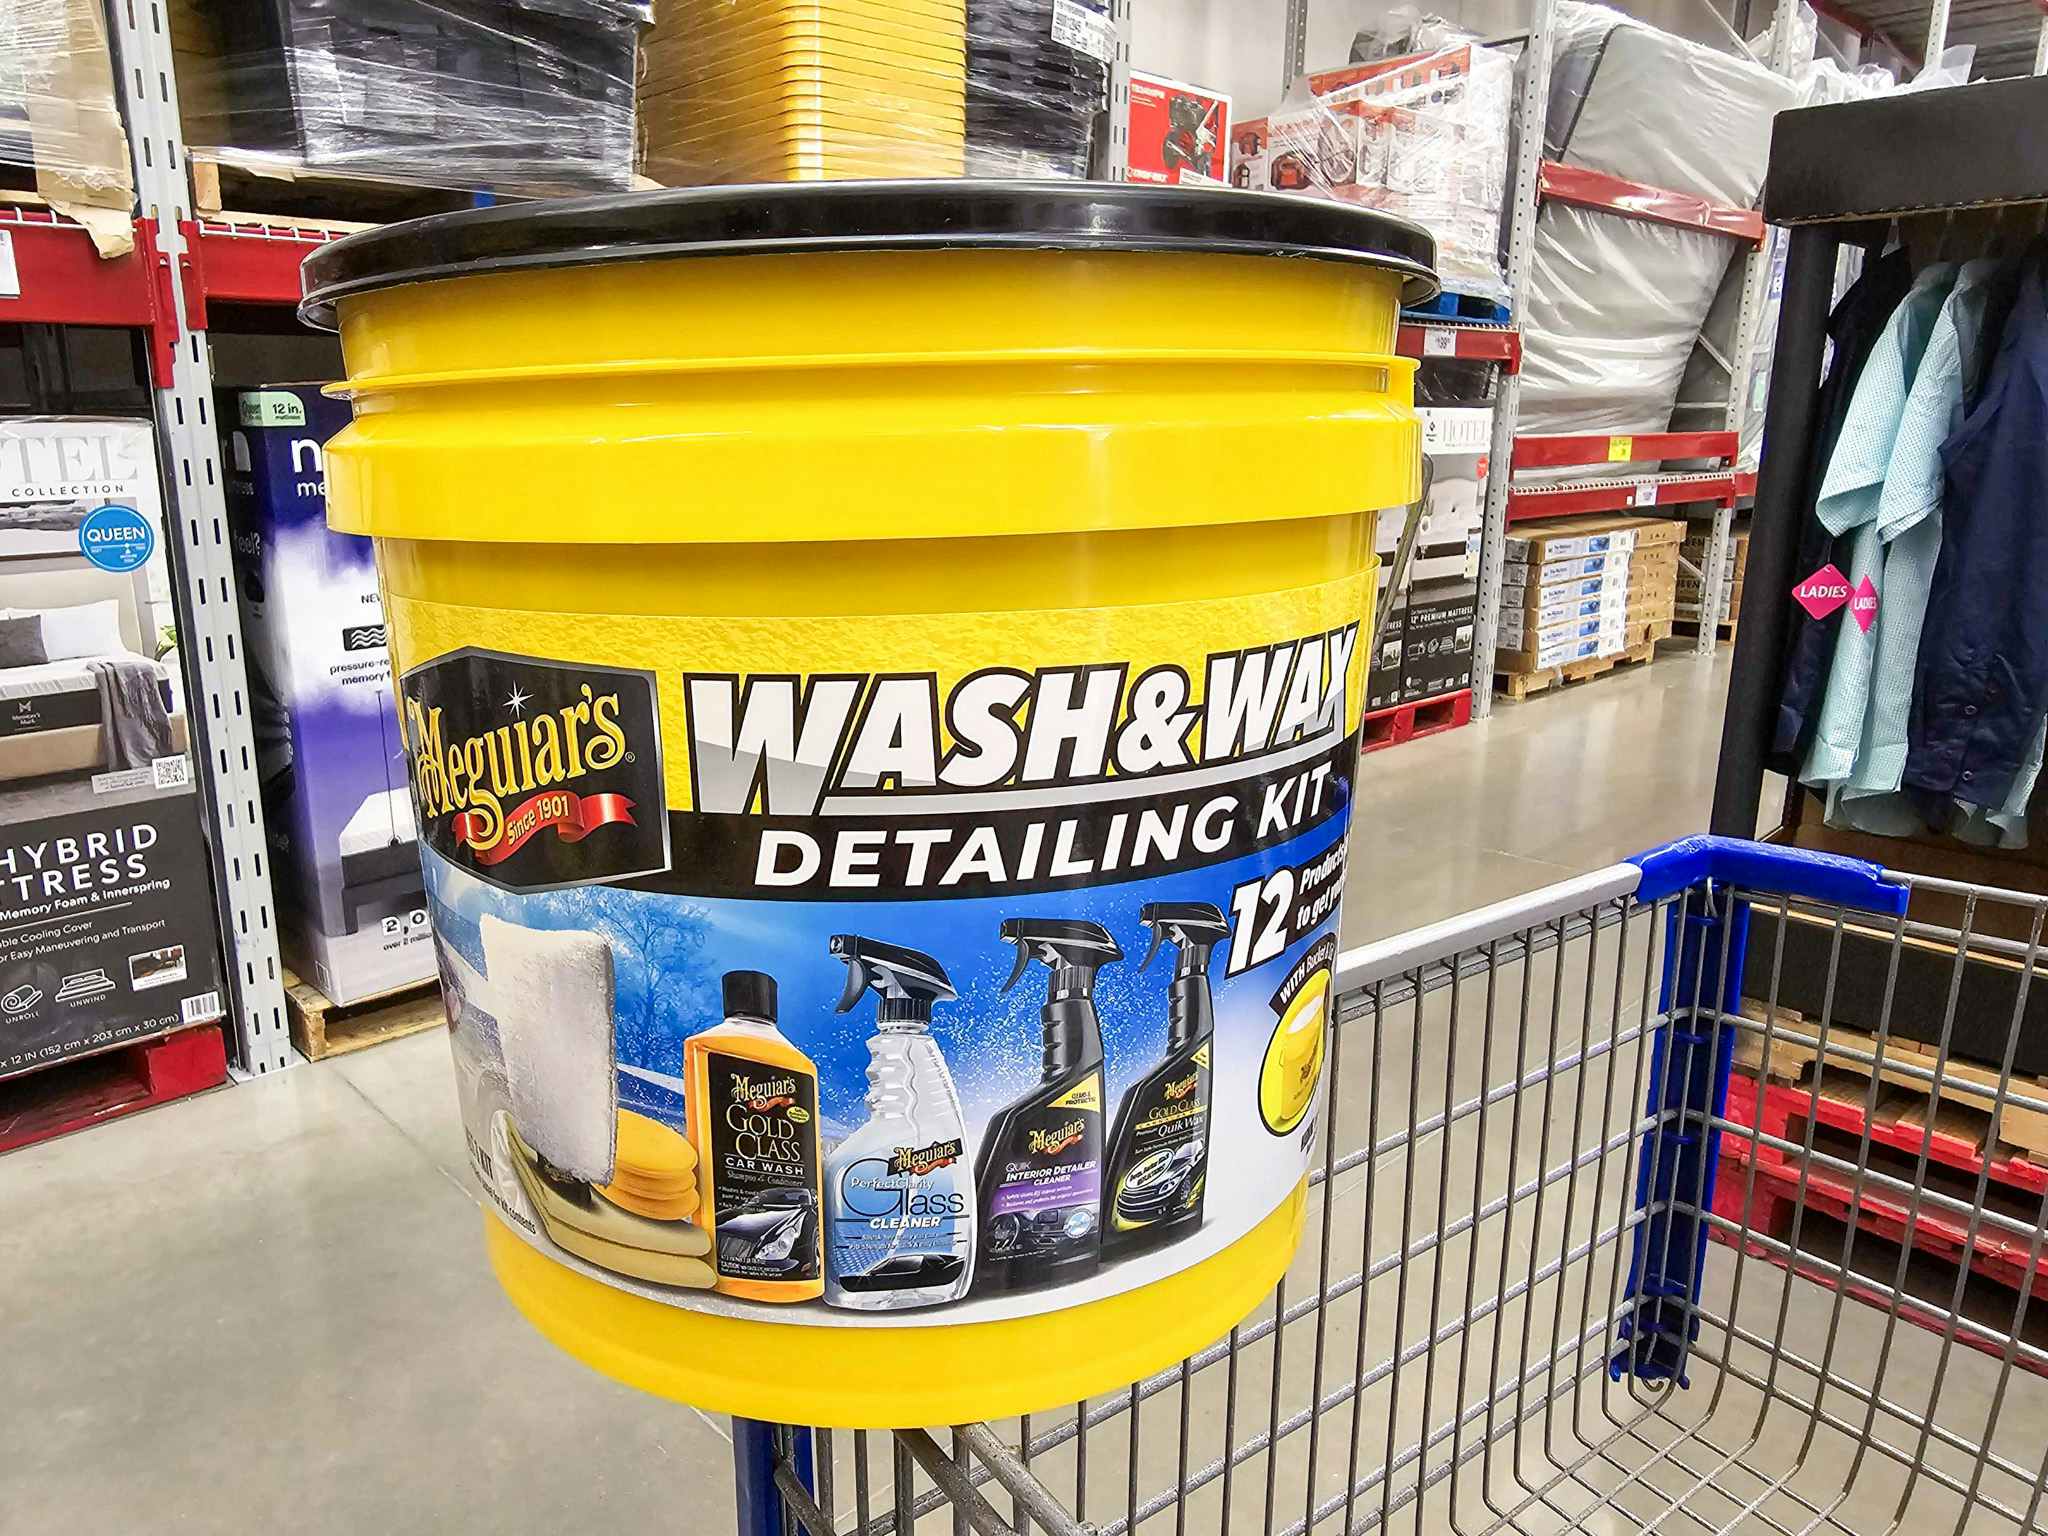 car detailing kit in a bucket on a shopping cart